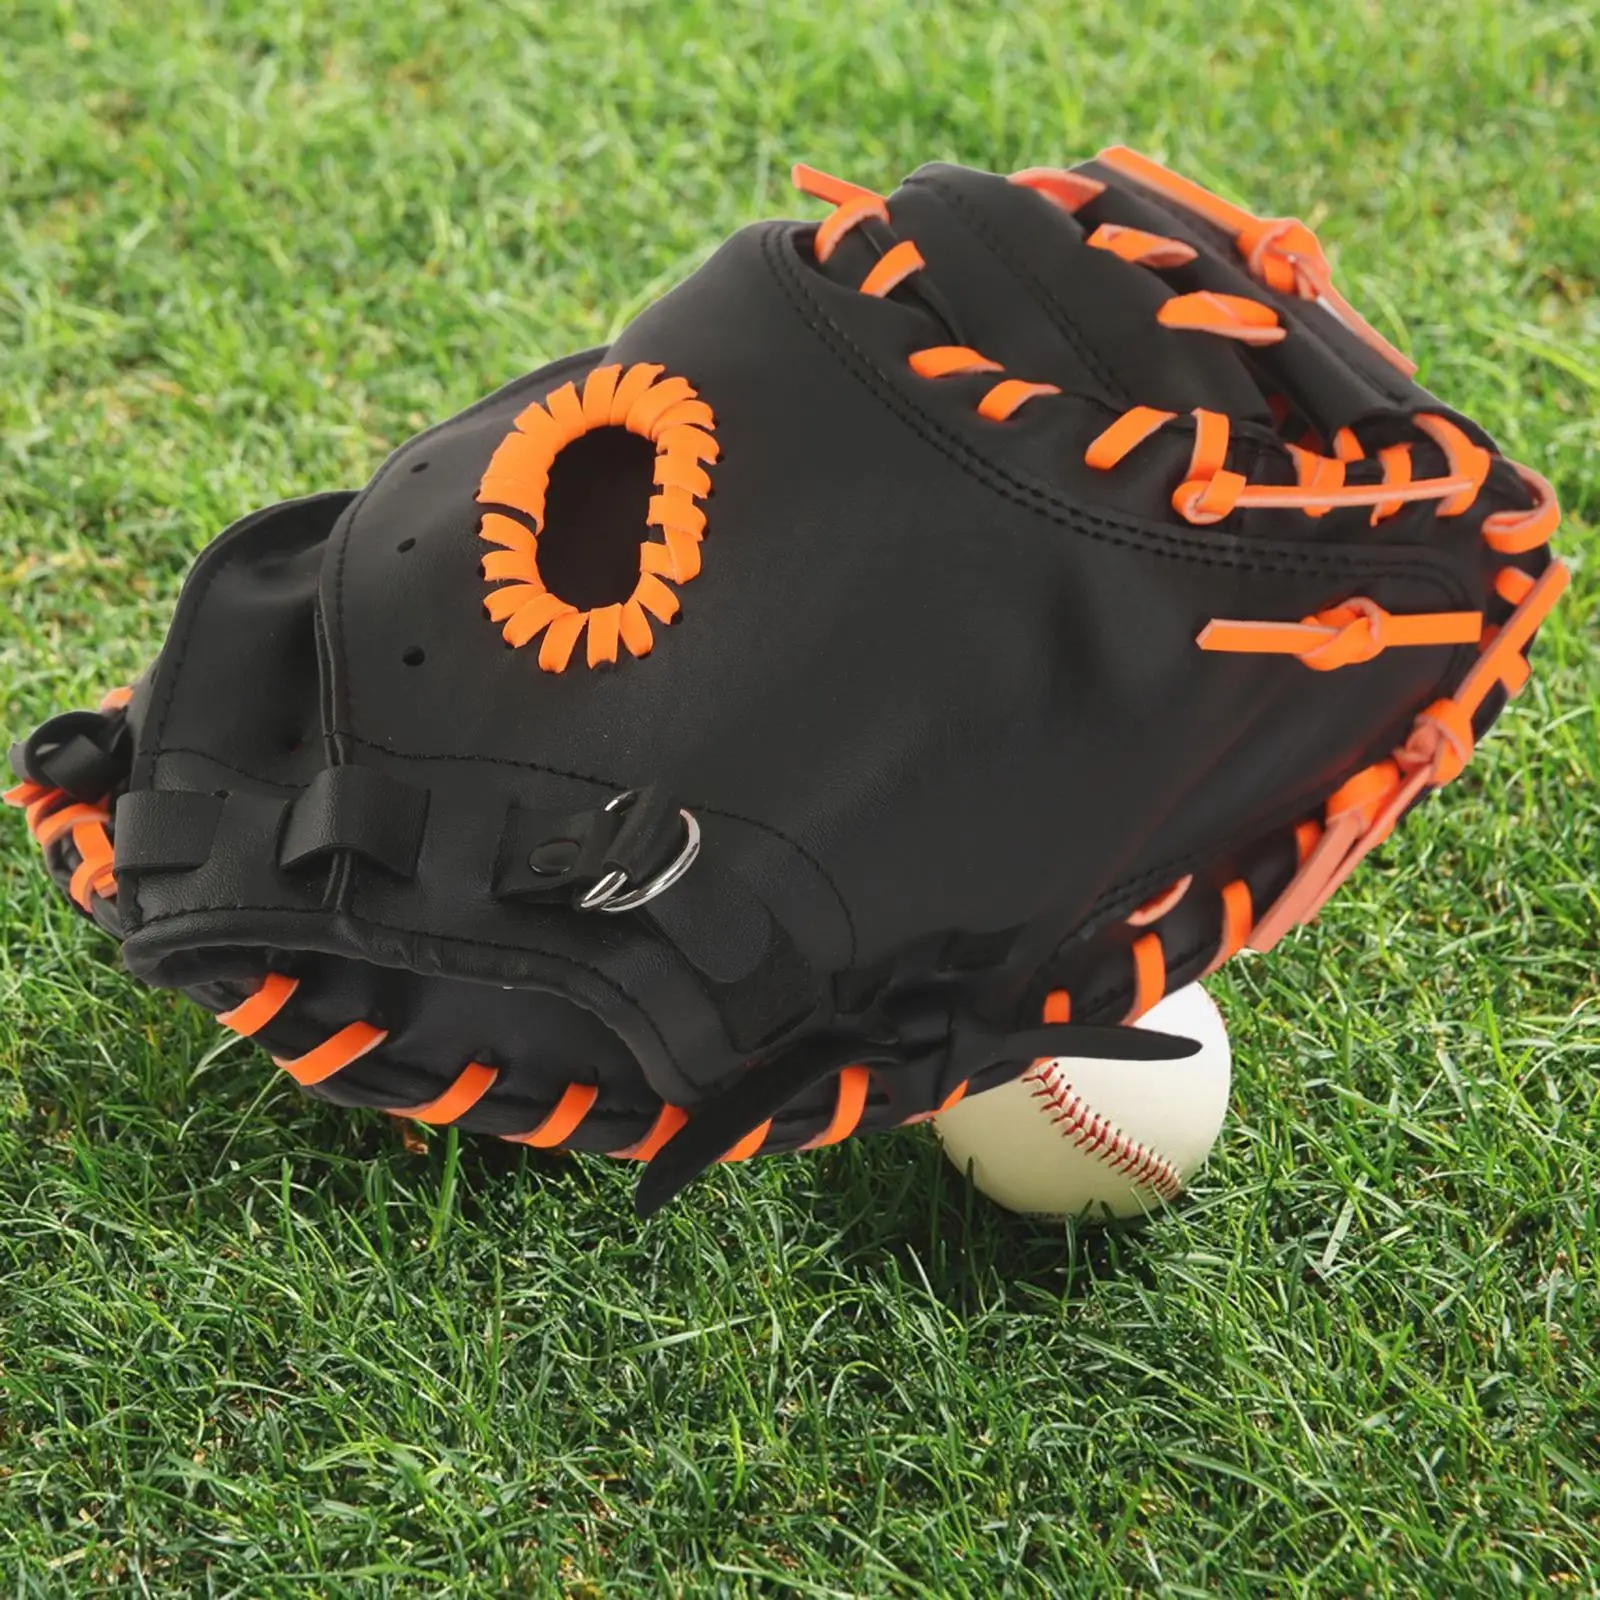 Baseball Gloves Softball Training Outfield Gloves Soft Catcher Mitts for Beginner Youth Adult Outdoor Sports Exercise Training